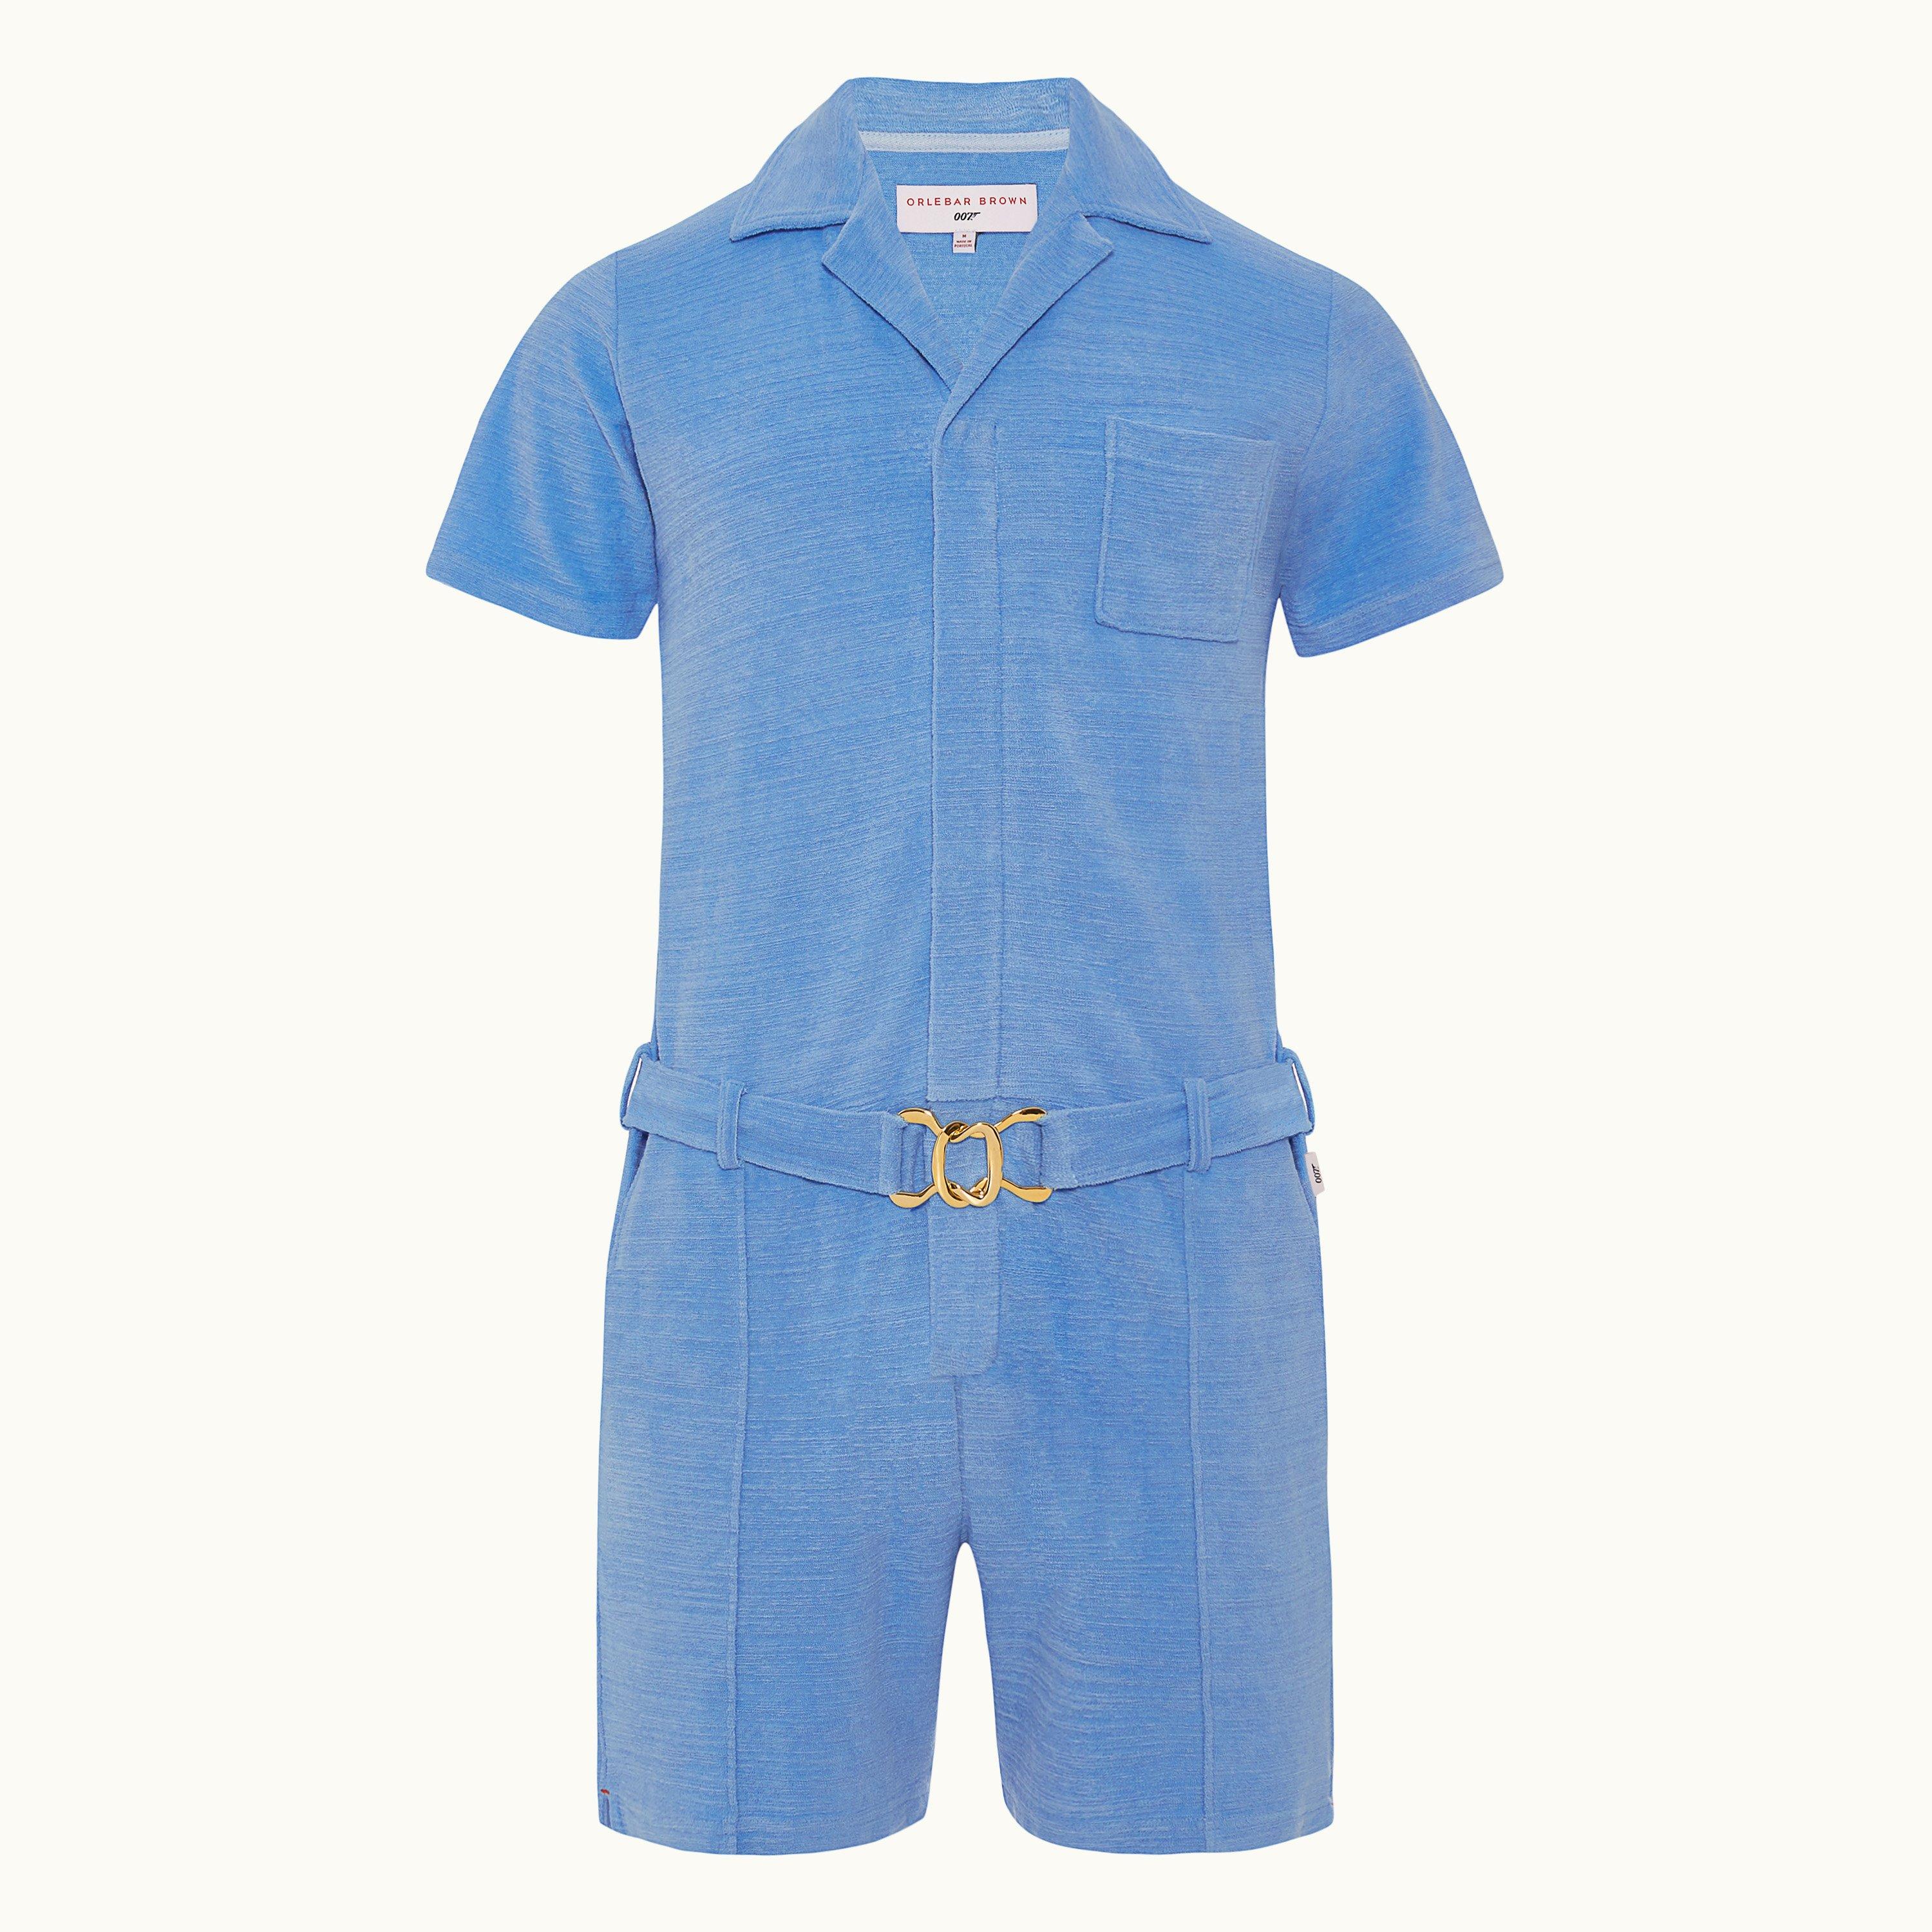 Goldfinger Onesie - 007 Riviera Towelling All-In-One | Orlebar Brown